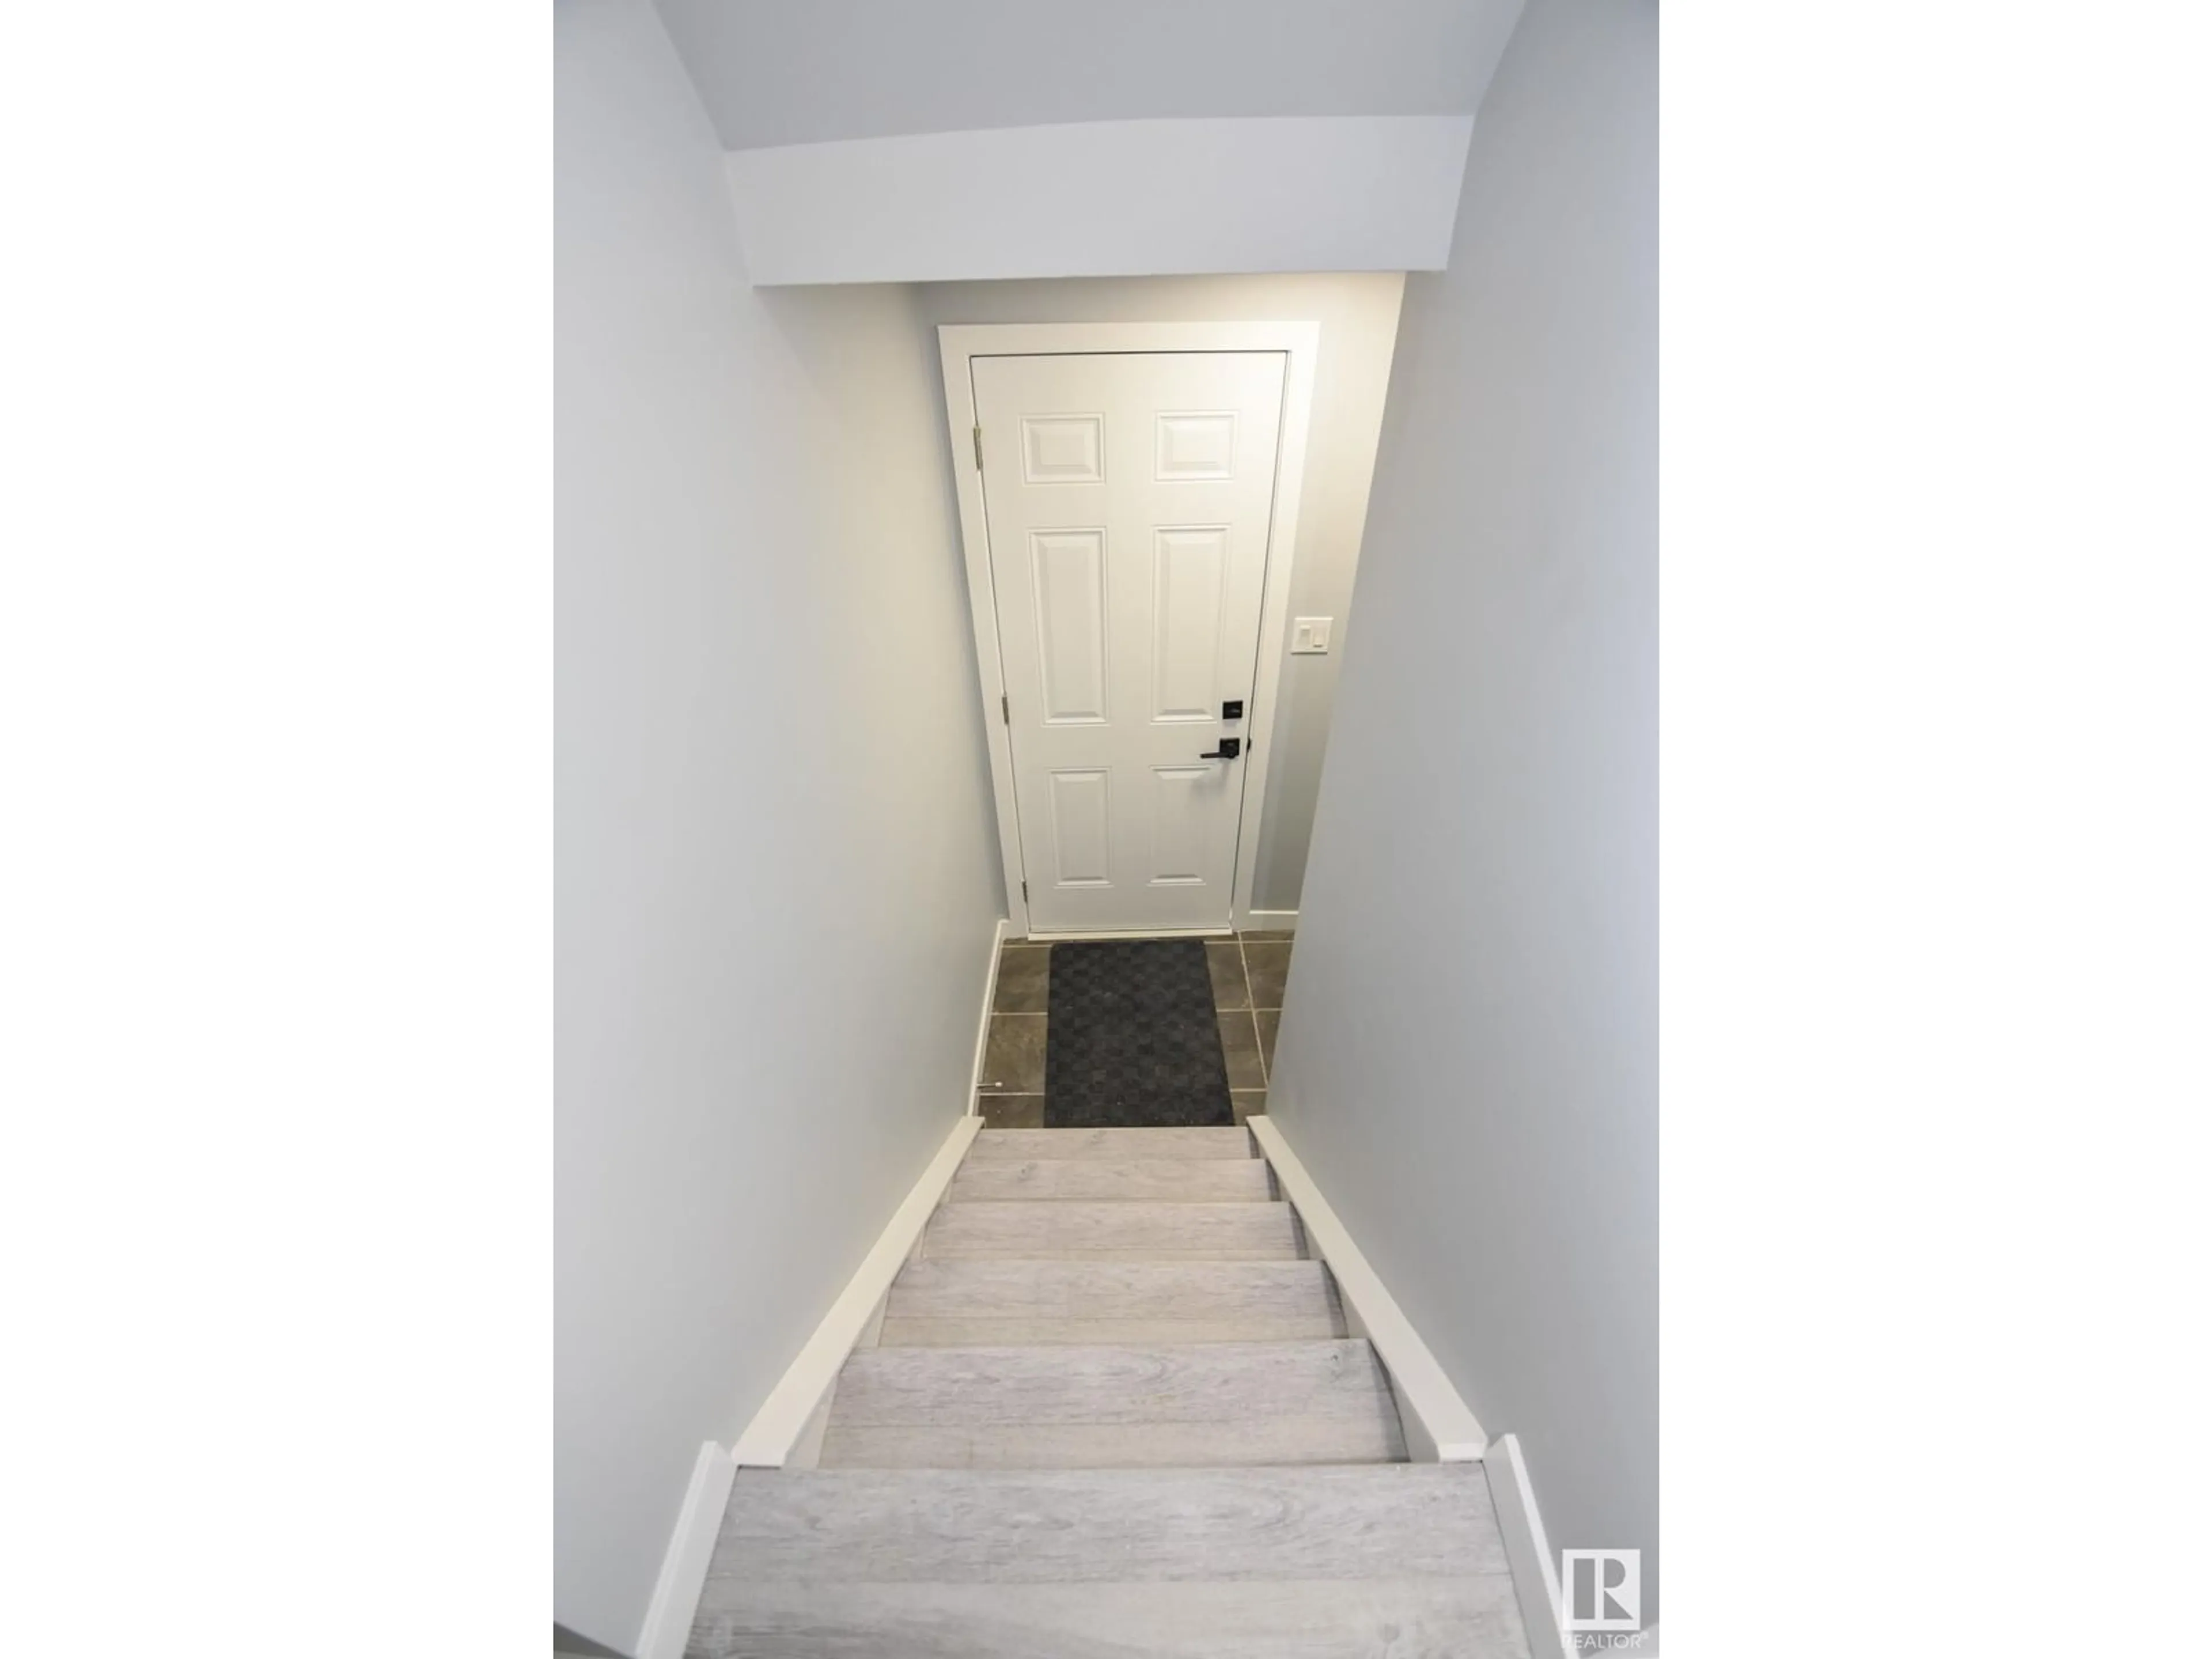 Stairs for #6 14305 82 ST NW, Edmonton Alberta T5E2V7